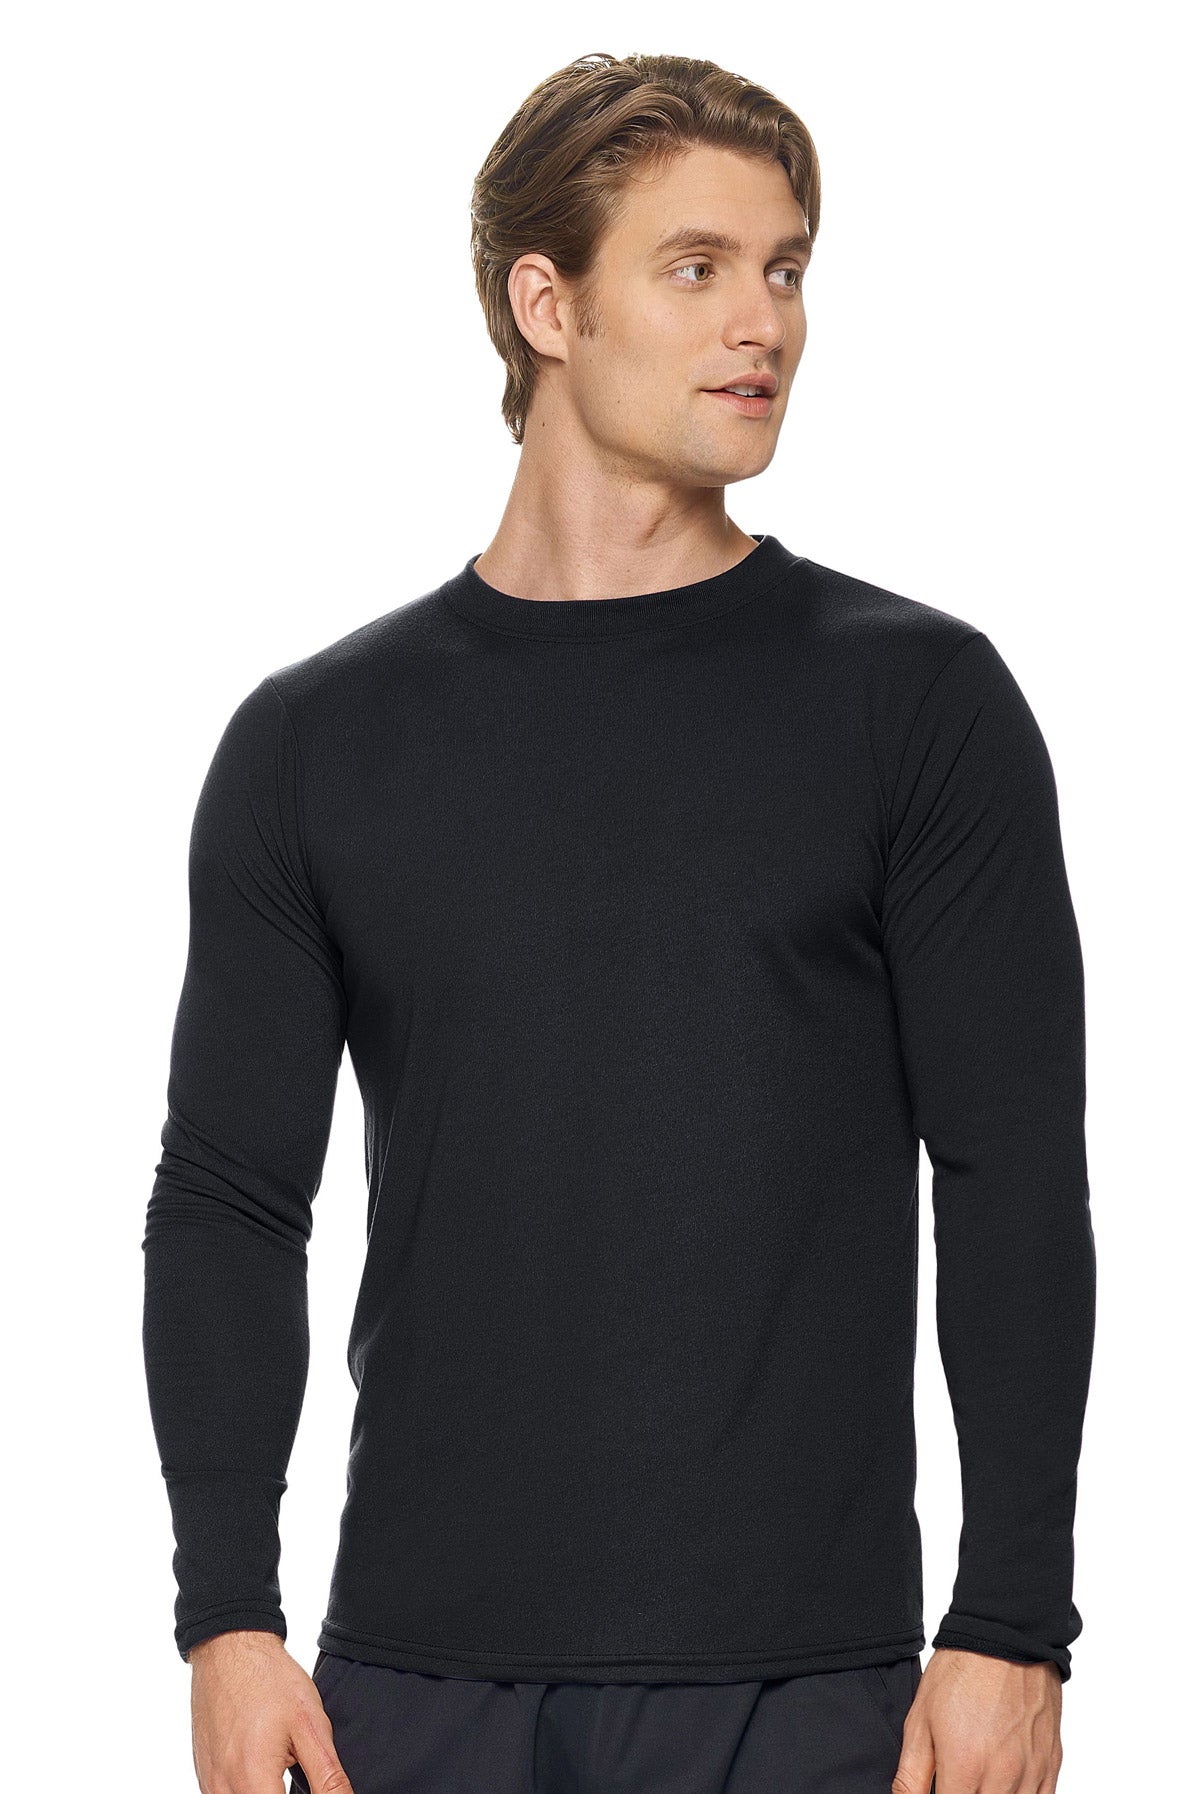 Expert Apparel Unisex Men's Long Sleeve in the Field Work Shirt Made in the USA in black#color_black